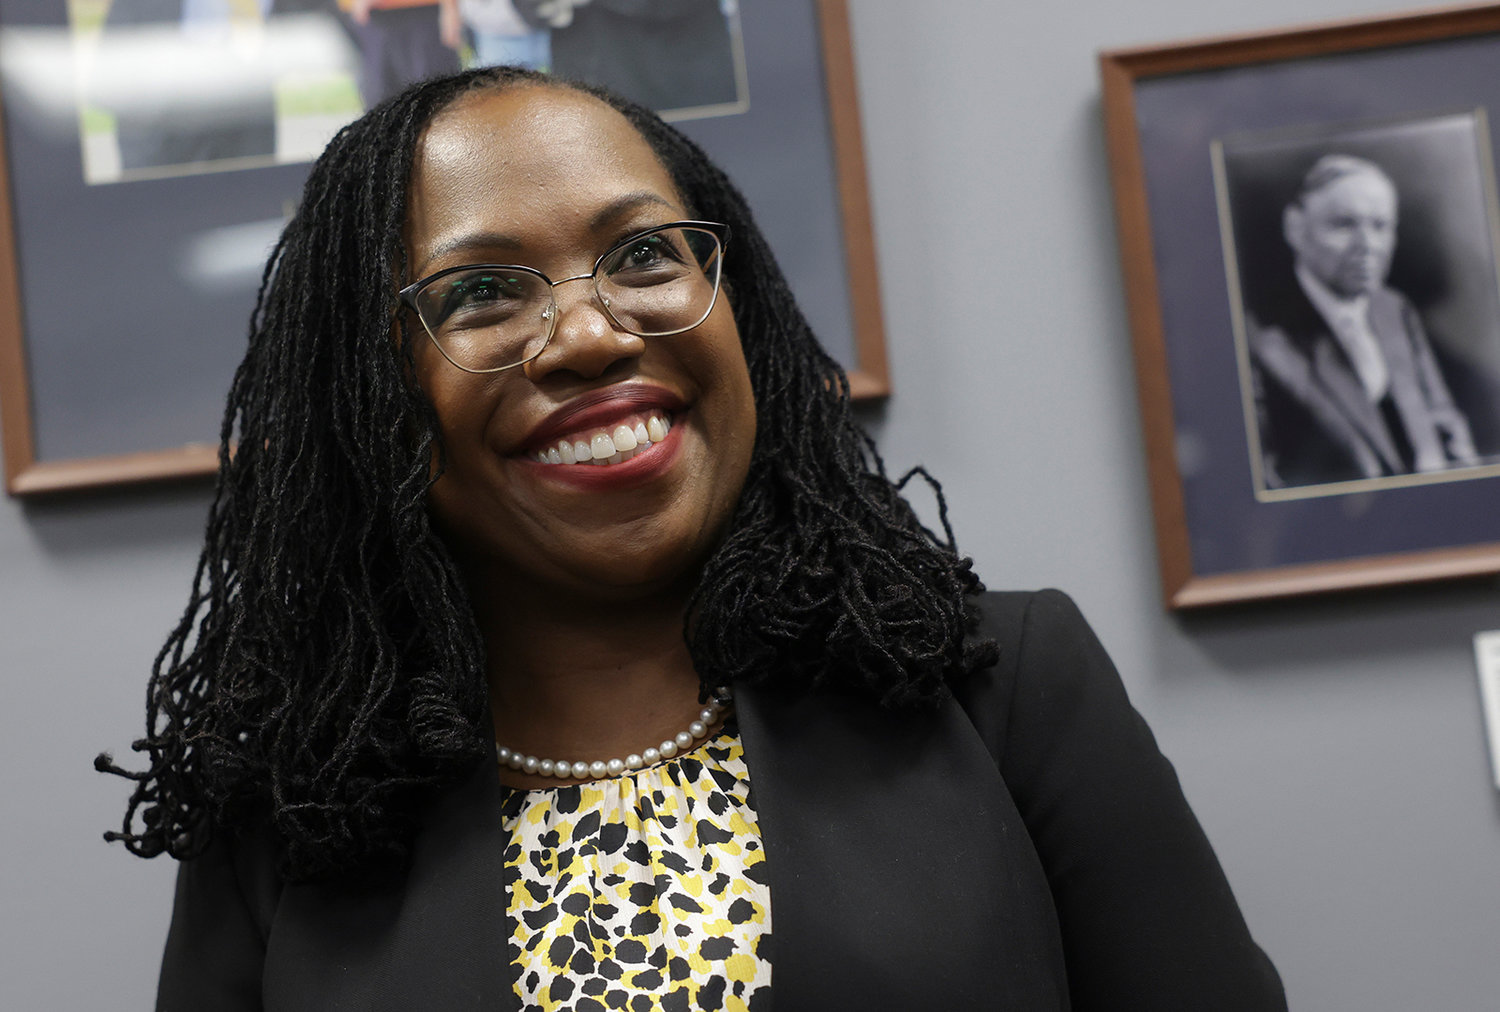 U.S. Supreme Court Nominee Ketanji Brown Jackson meets with Sen. Sherrod Brown, D-Ohio, in his office on Capitol Hill, on April 5, 2022, in Washington, D.C. The U.S. Senate on Thursday voted to confirm her, making her the first Black woman to ascend to the high court. (Kevin Dietsch/Getty Images/TNS)